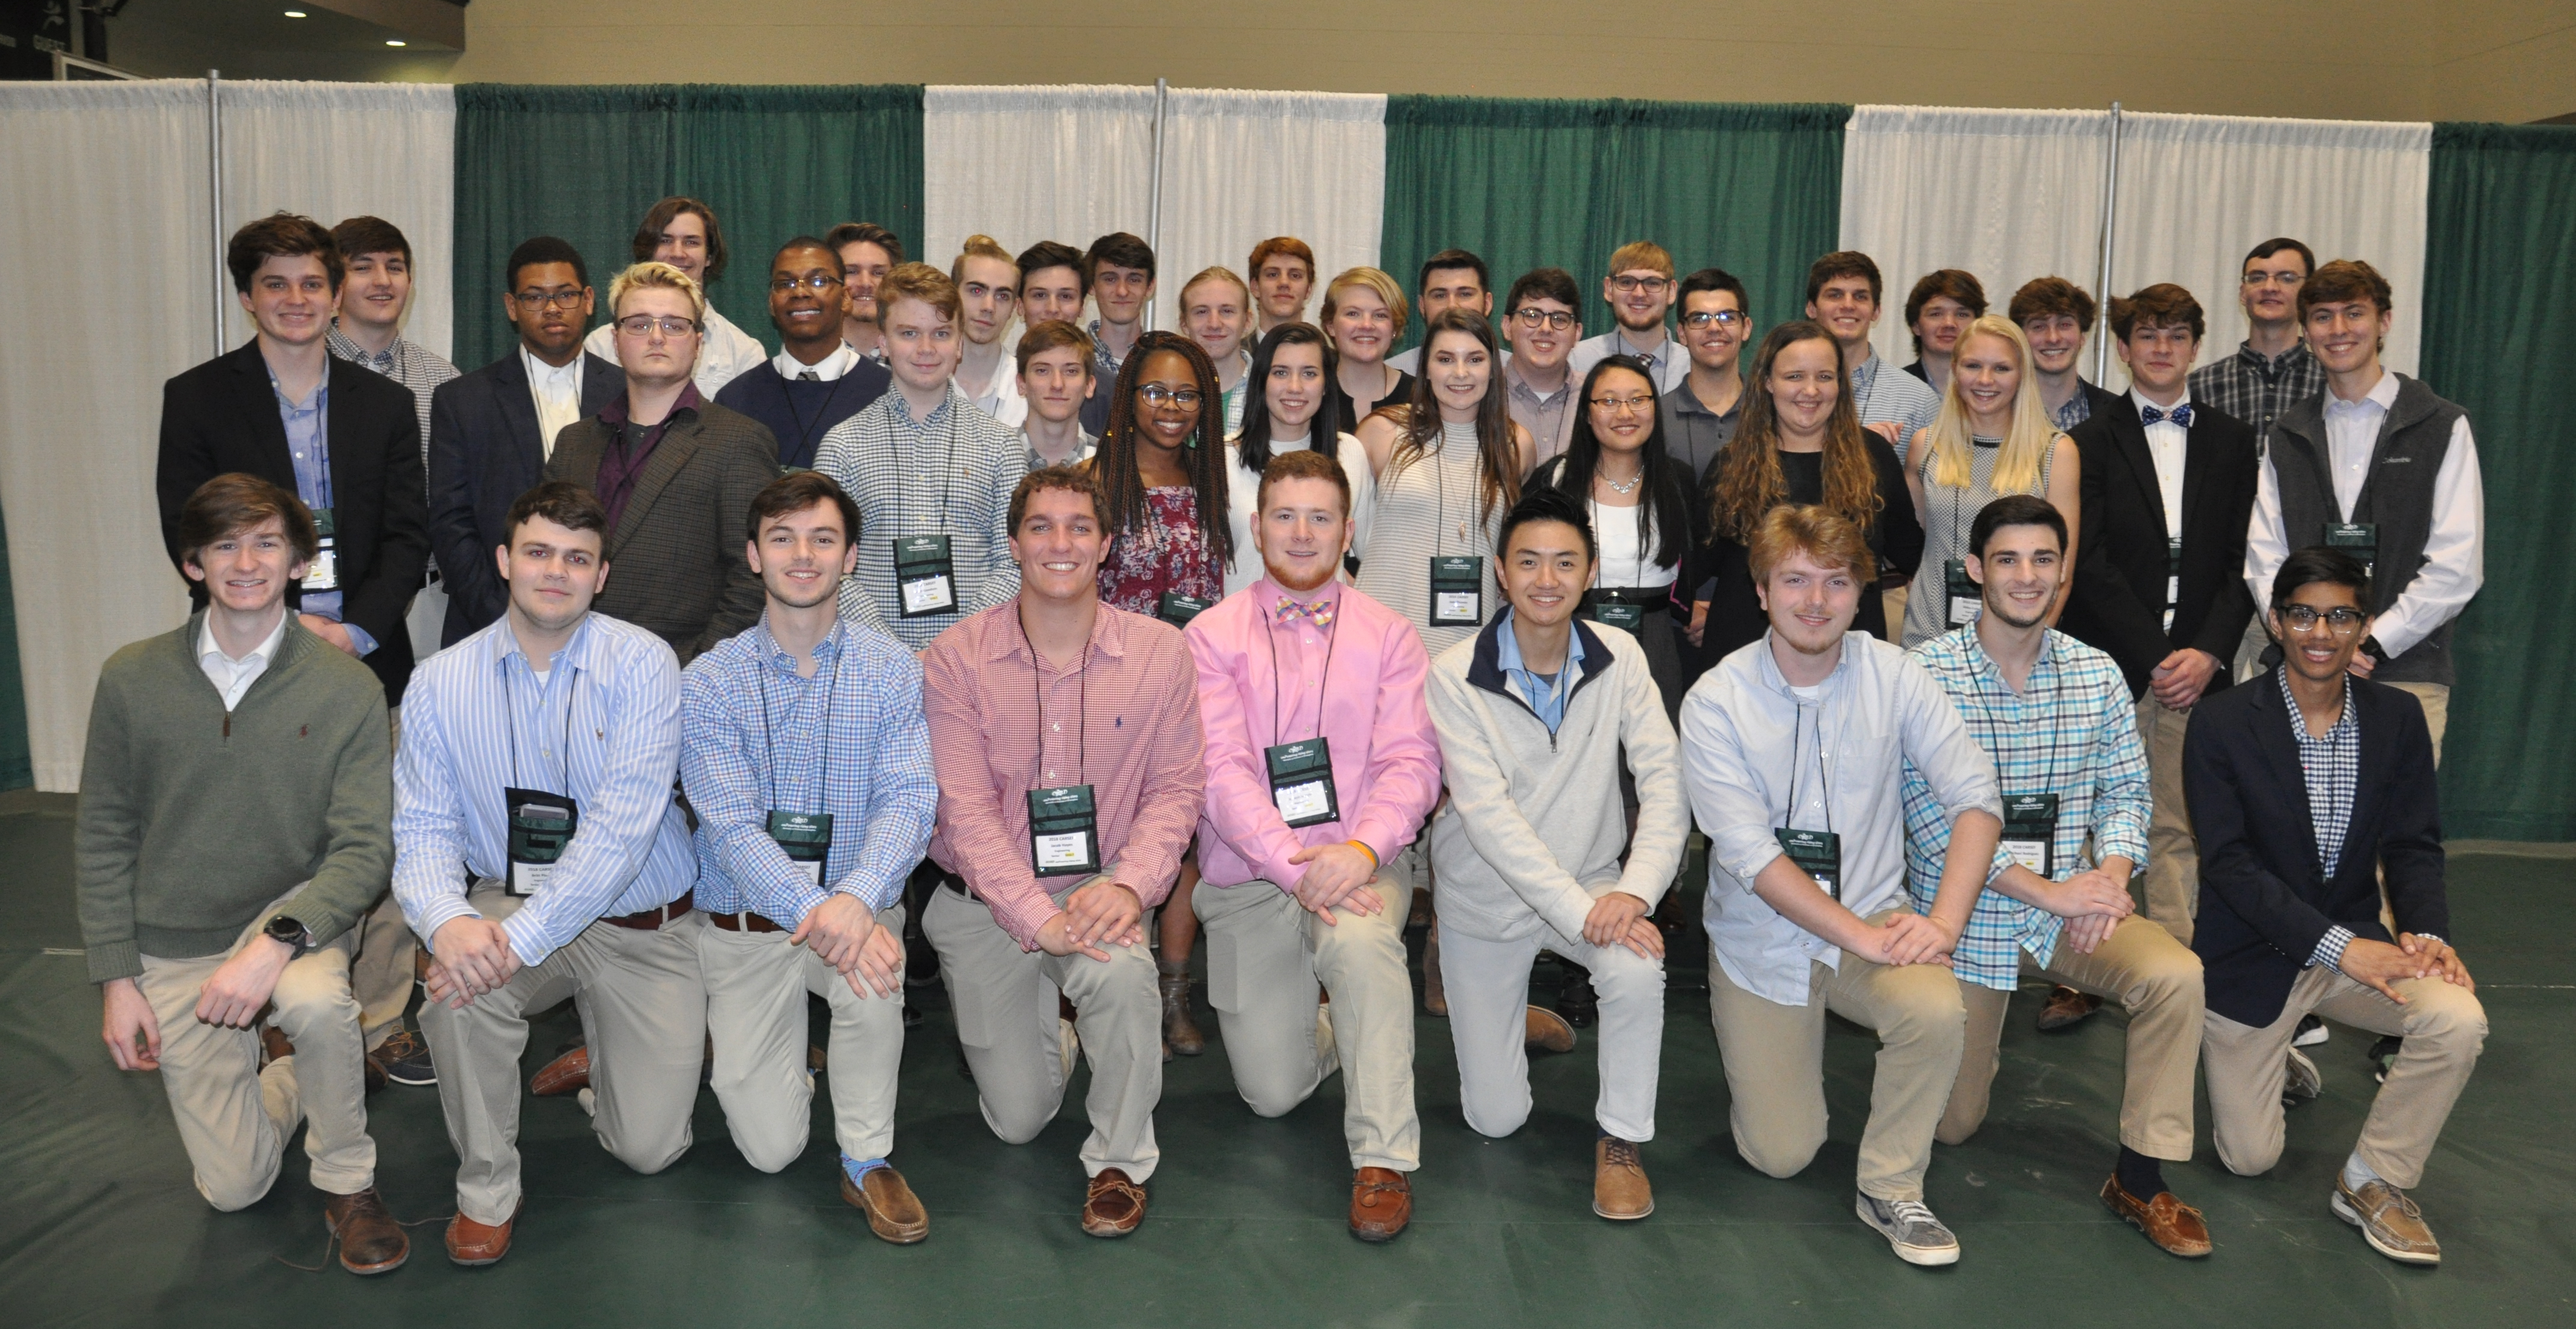 PHOTO GALLERY: HTHS Engineering students talk projects won at UAB Science Fair